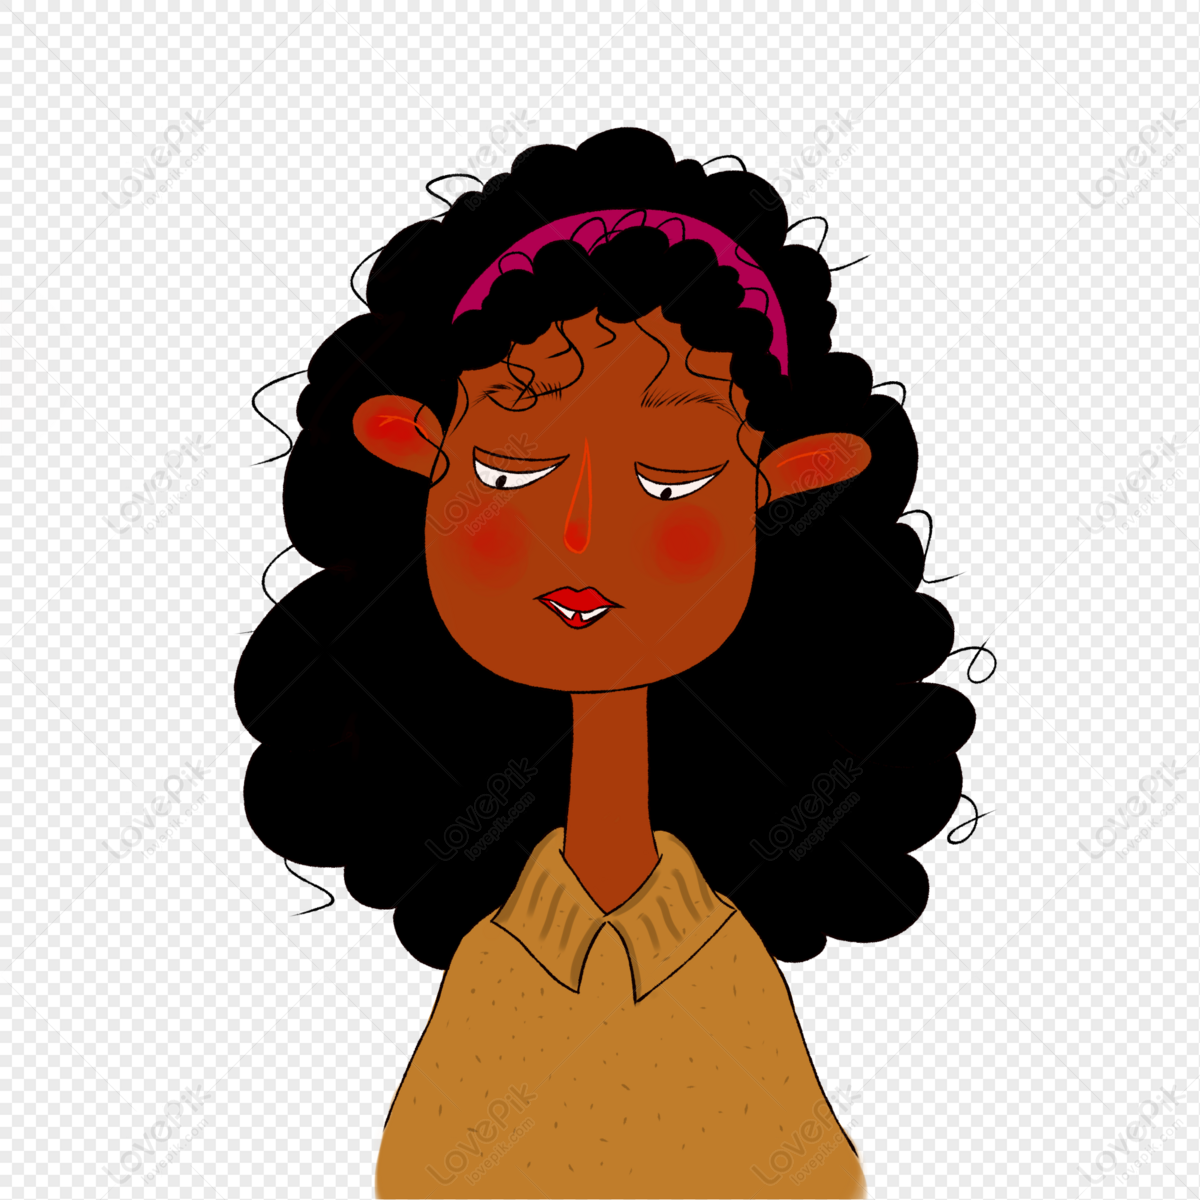 Curly Girl Avatar PNG White Transparent And Clipart Image For Free Download  - Lovepik | 401325642